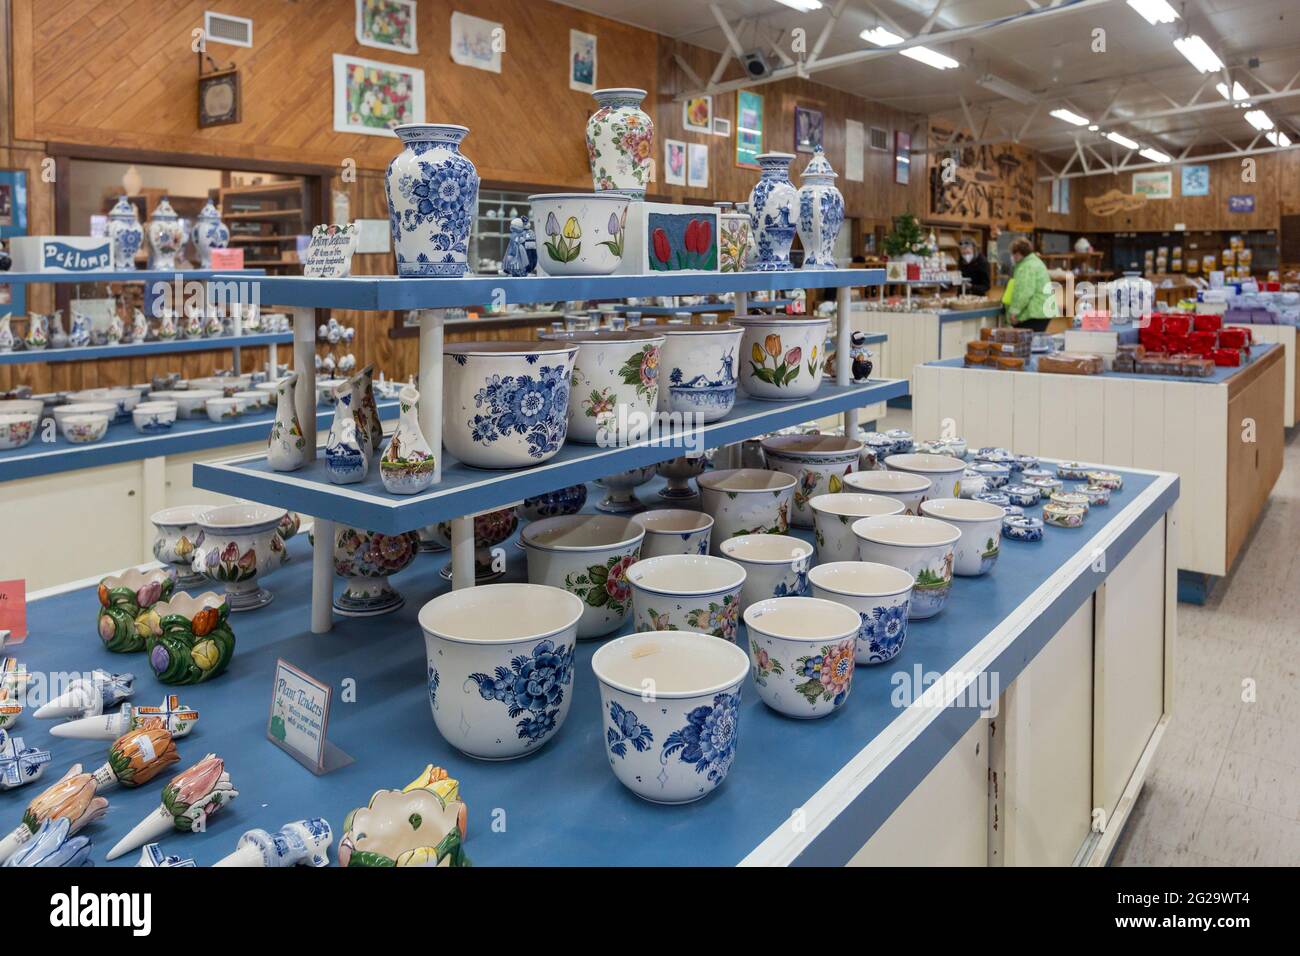 Holland, Michigan - Delftware on sale at the De Klomp Wooden Shoe and Delft Factory, part of the Veldheer Tulip Farm. The city's Dutch heritage is on Stock Photo